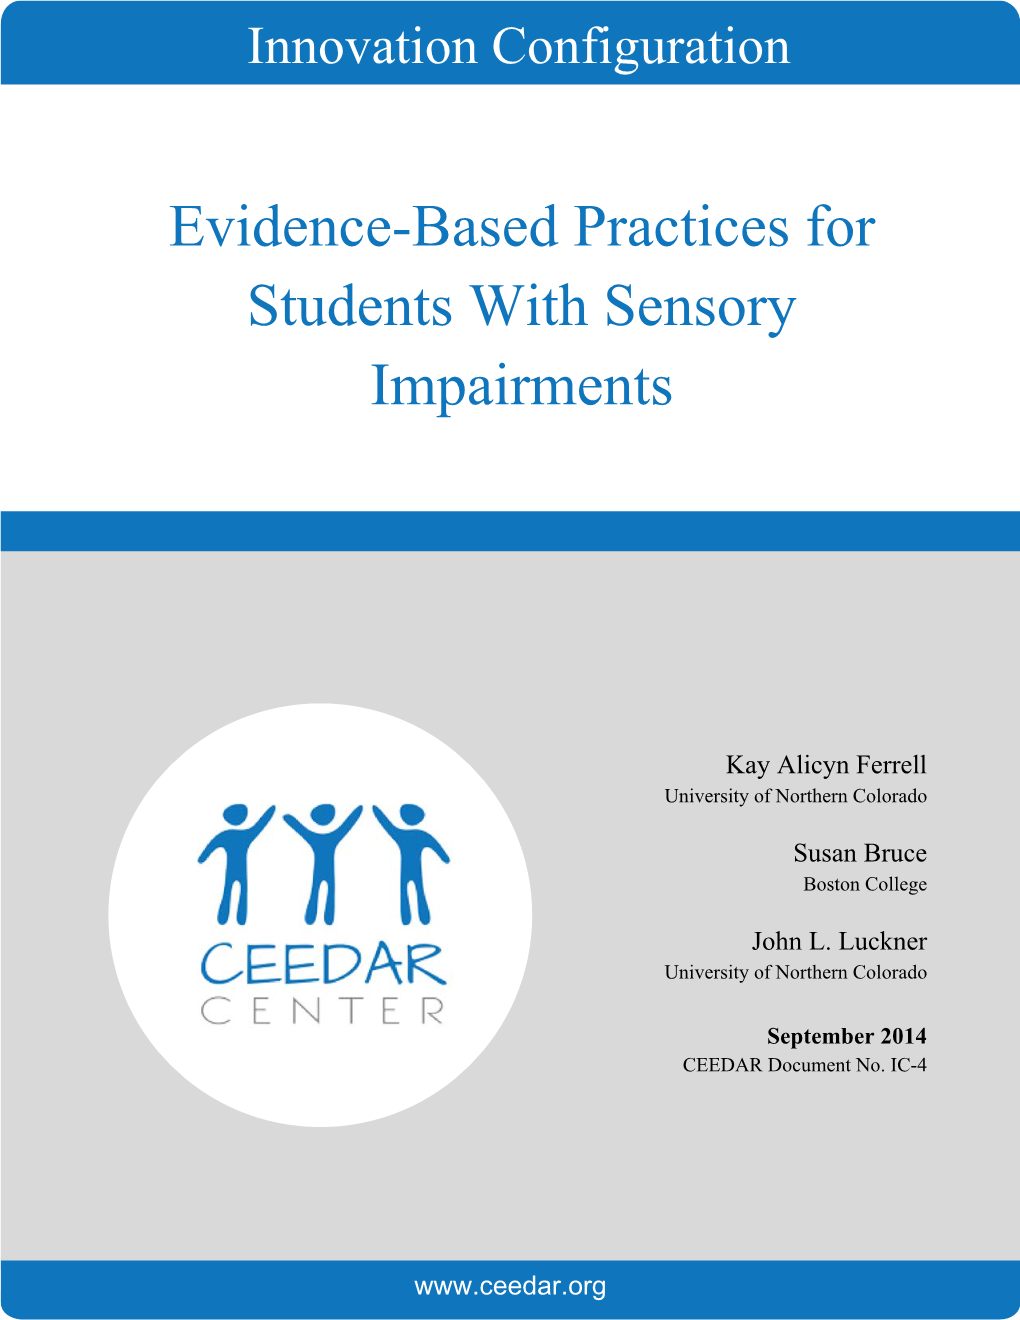 Evidence-Based Practices for Students with Sensory Impairments (Document No